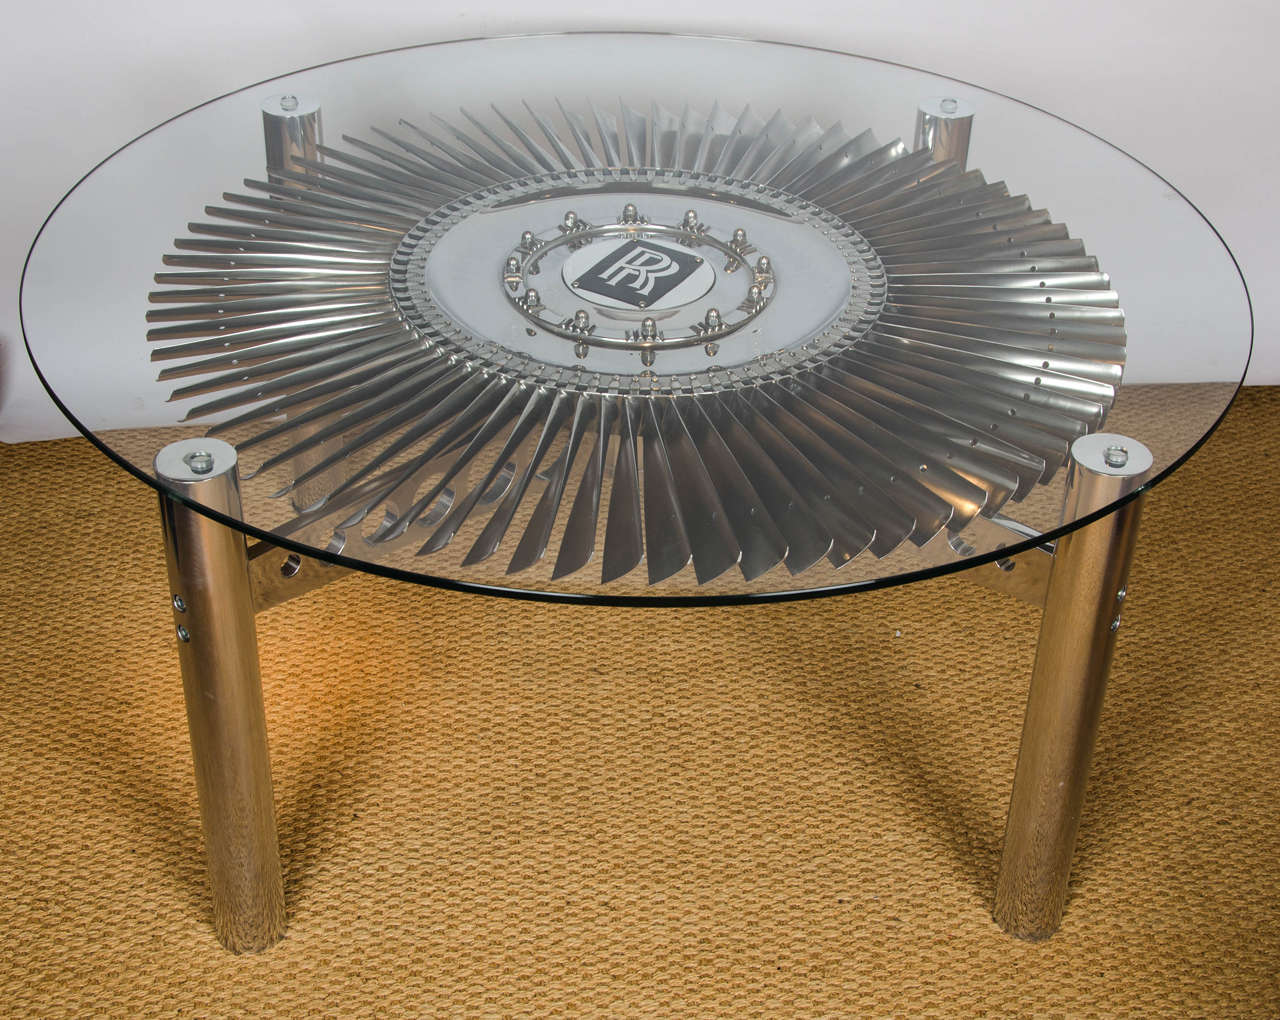 A Rolls Royce turbine, metal and glass coffee table. Made using the cleaned and repolished turbine blades from a Rolls Royce Pegasus engine used in the Hawker Harrier (Jump Jet).  The turbine blade is mounted on a smooth running bearing and rotates